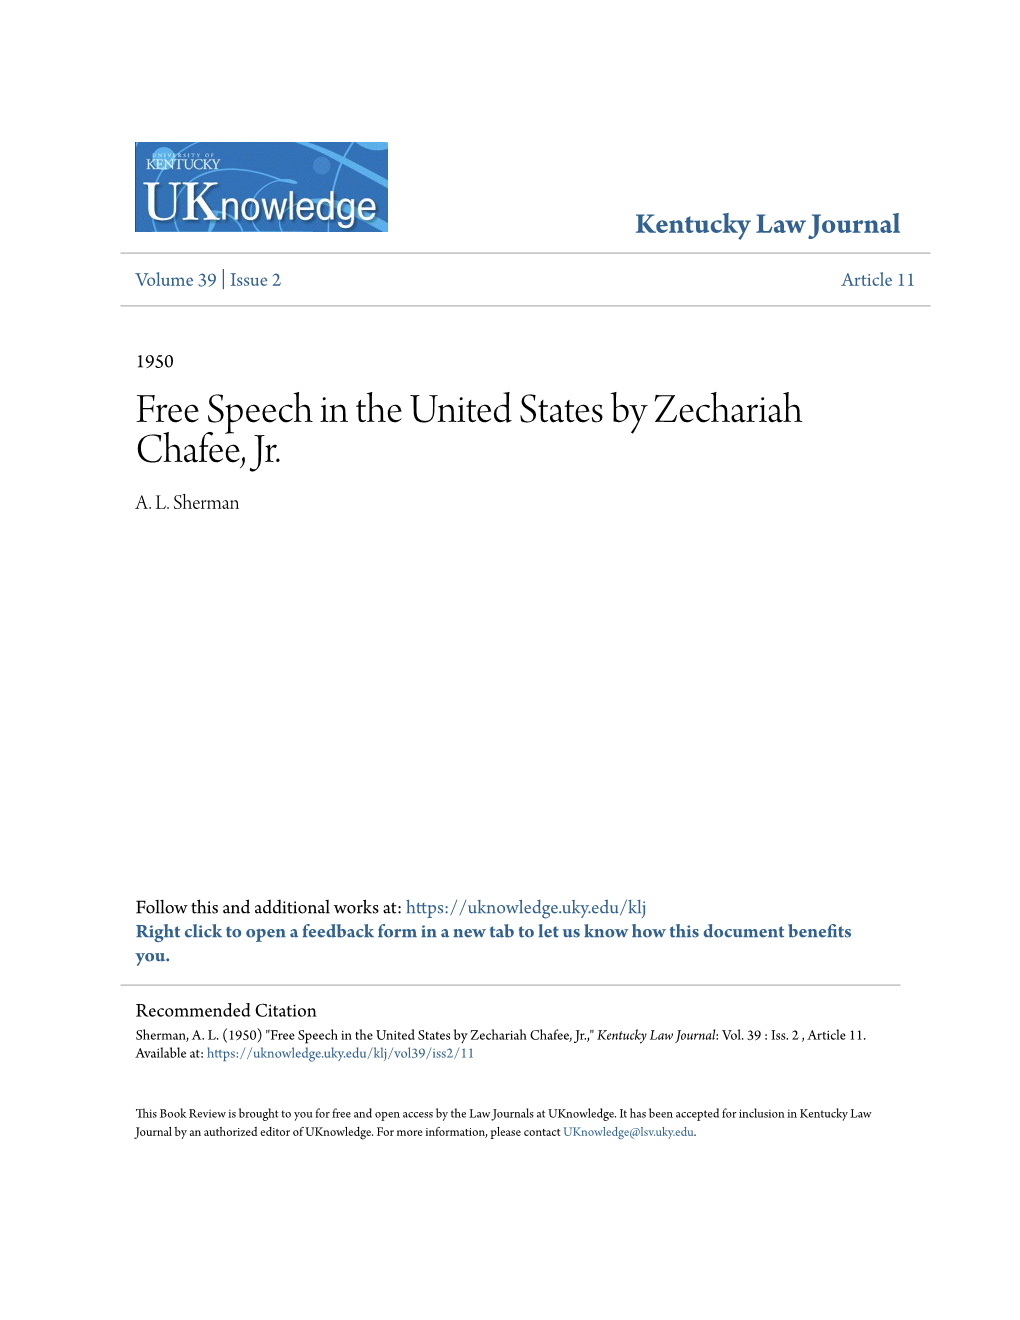 Free Speech in the United States by Zechariah Chafee, Jr